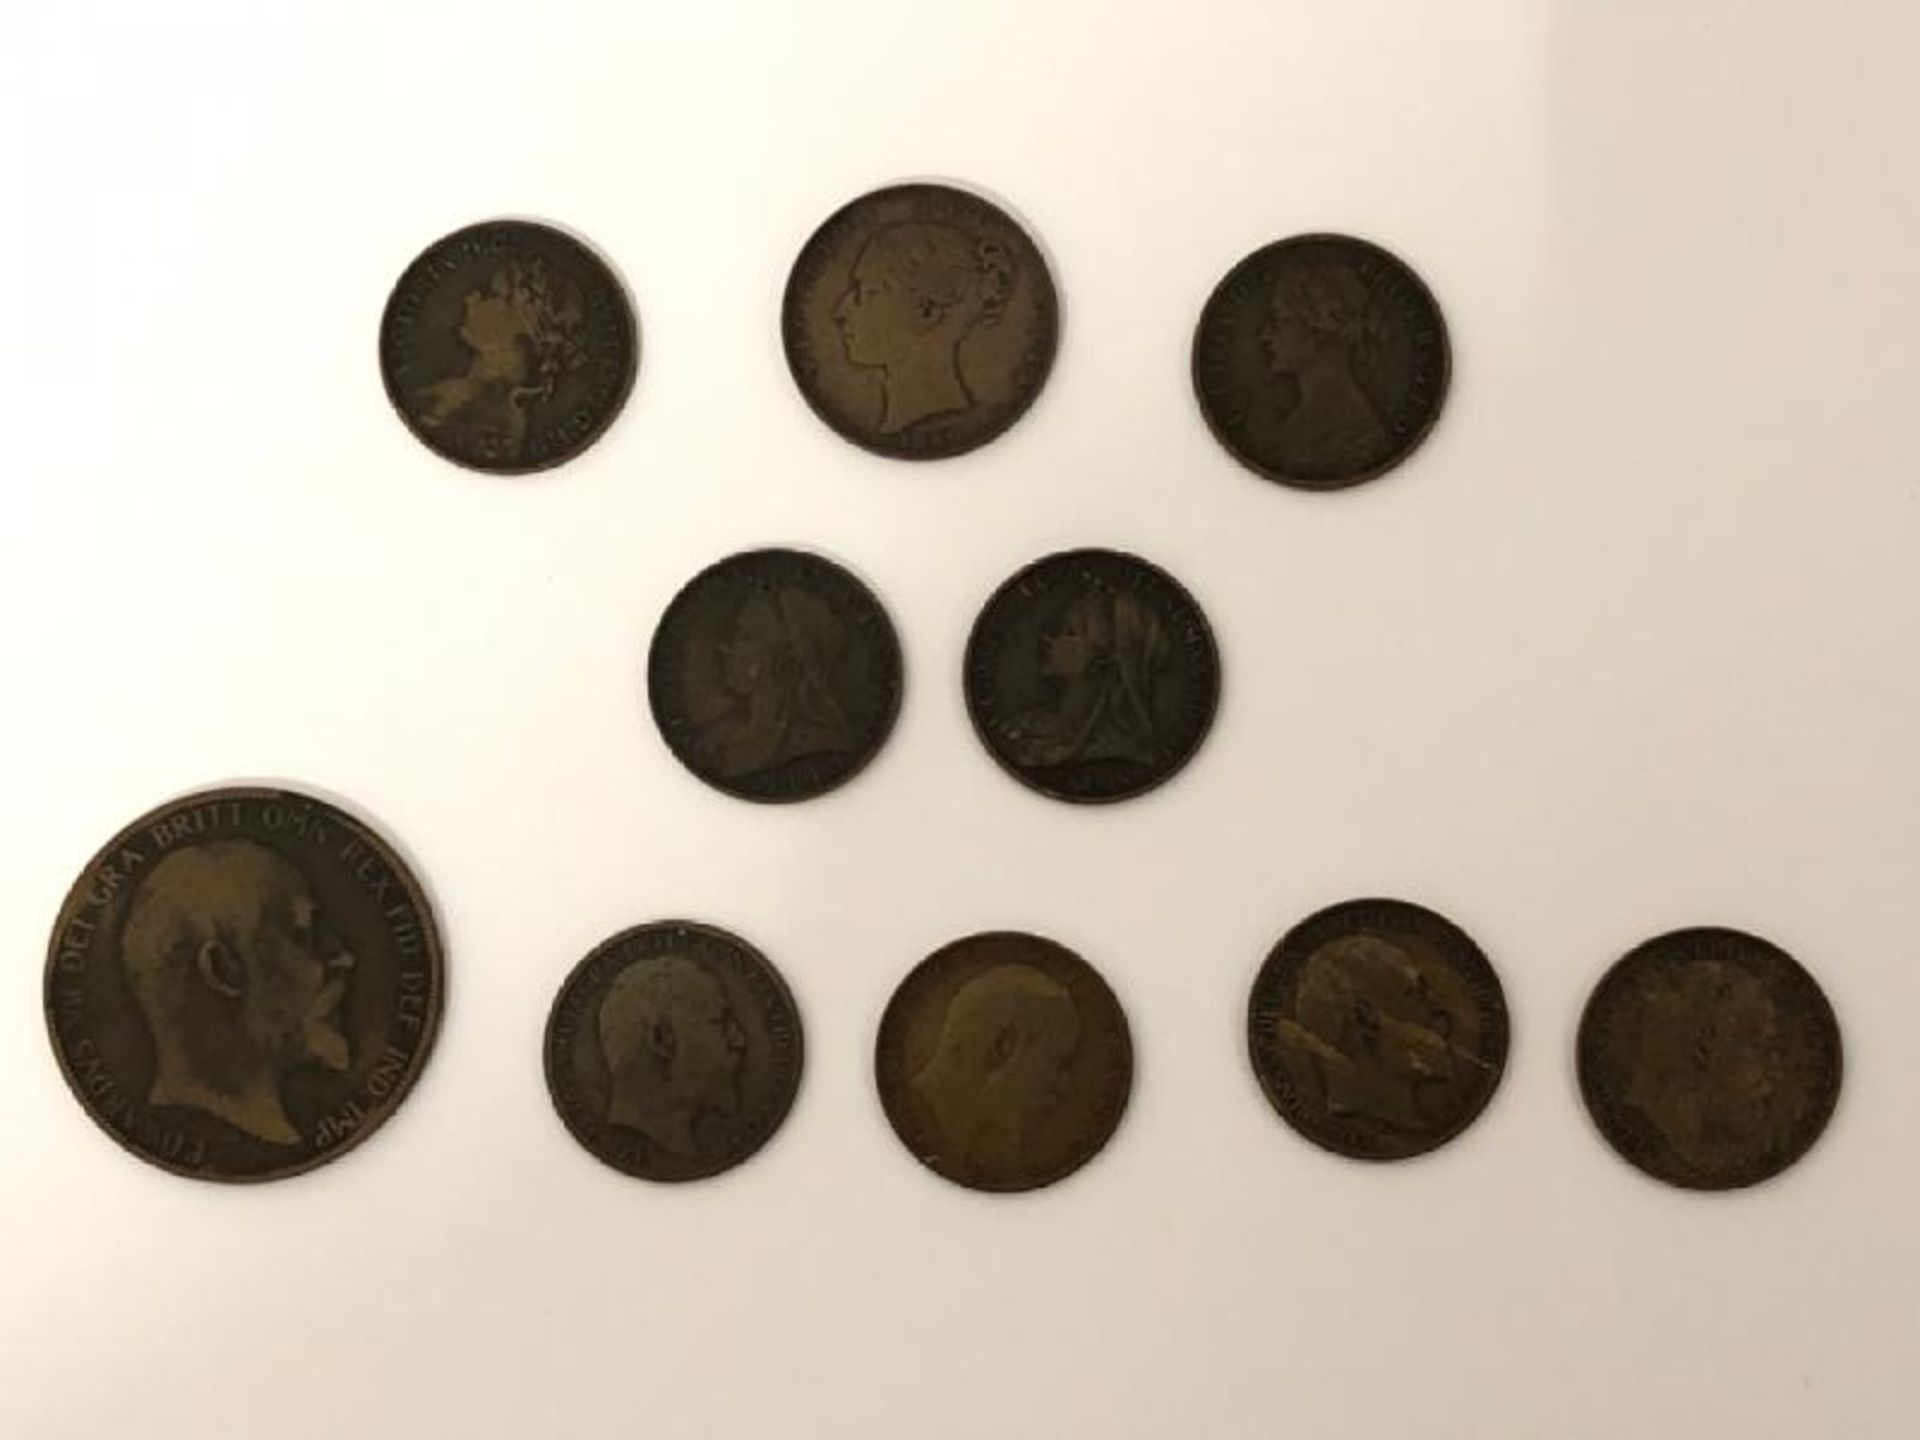 Five Queen Victoria coins dated 1840, 1879, 1862, 1898 and 1900 with five Edward VII coins / AN9